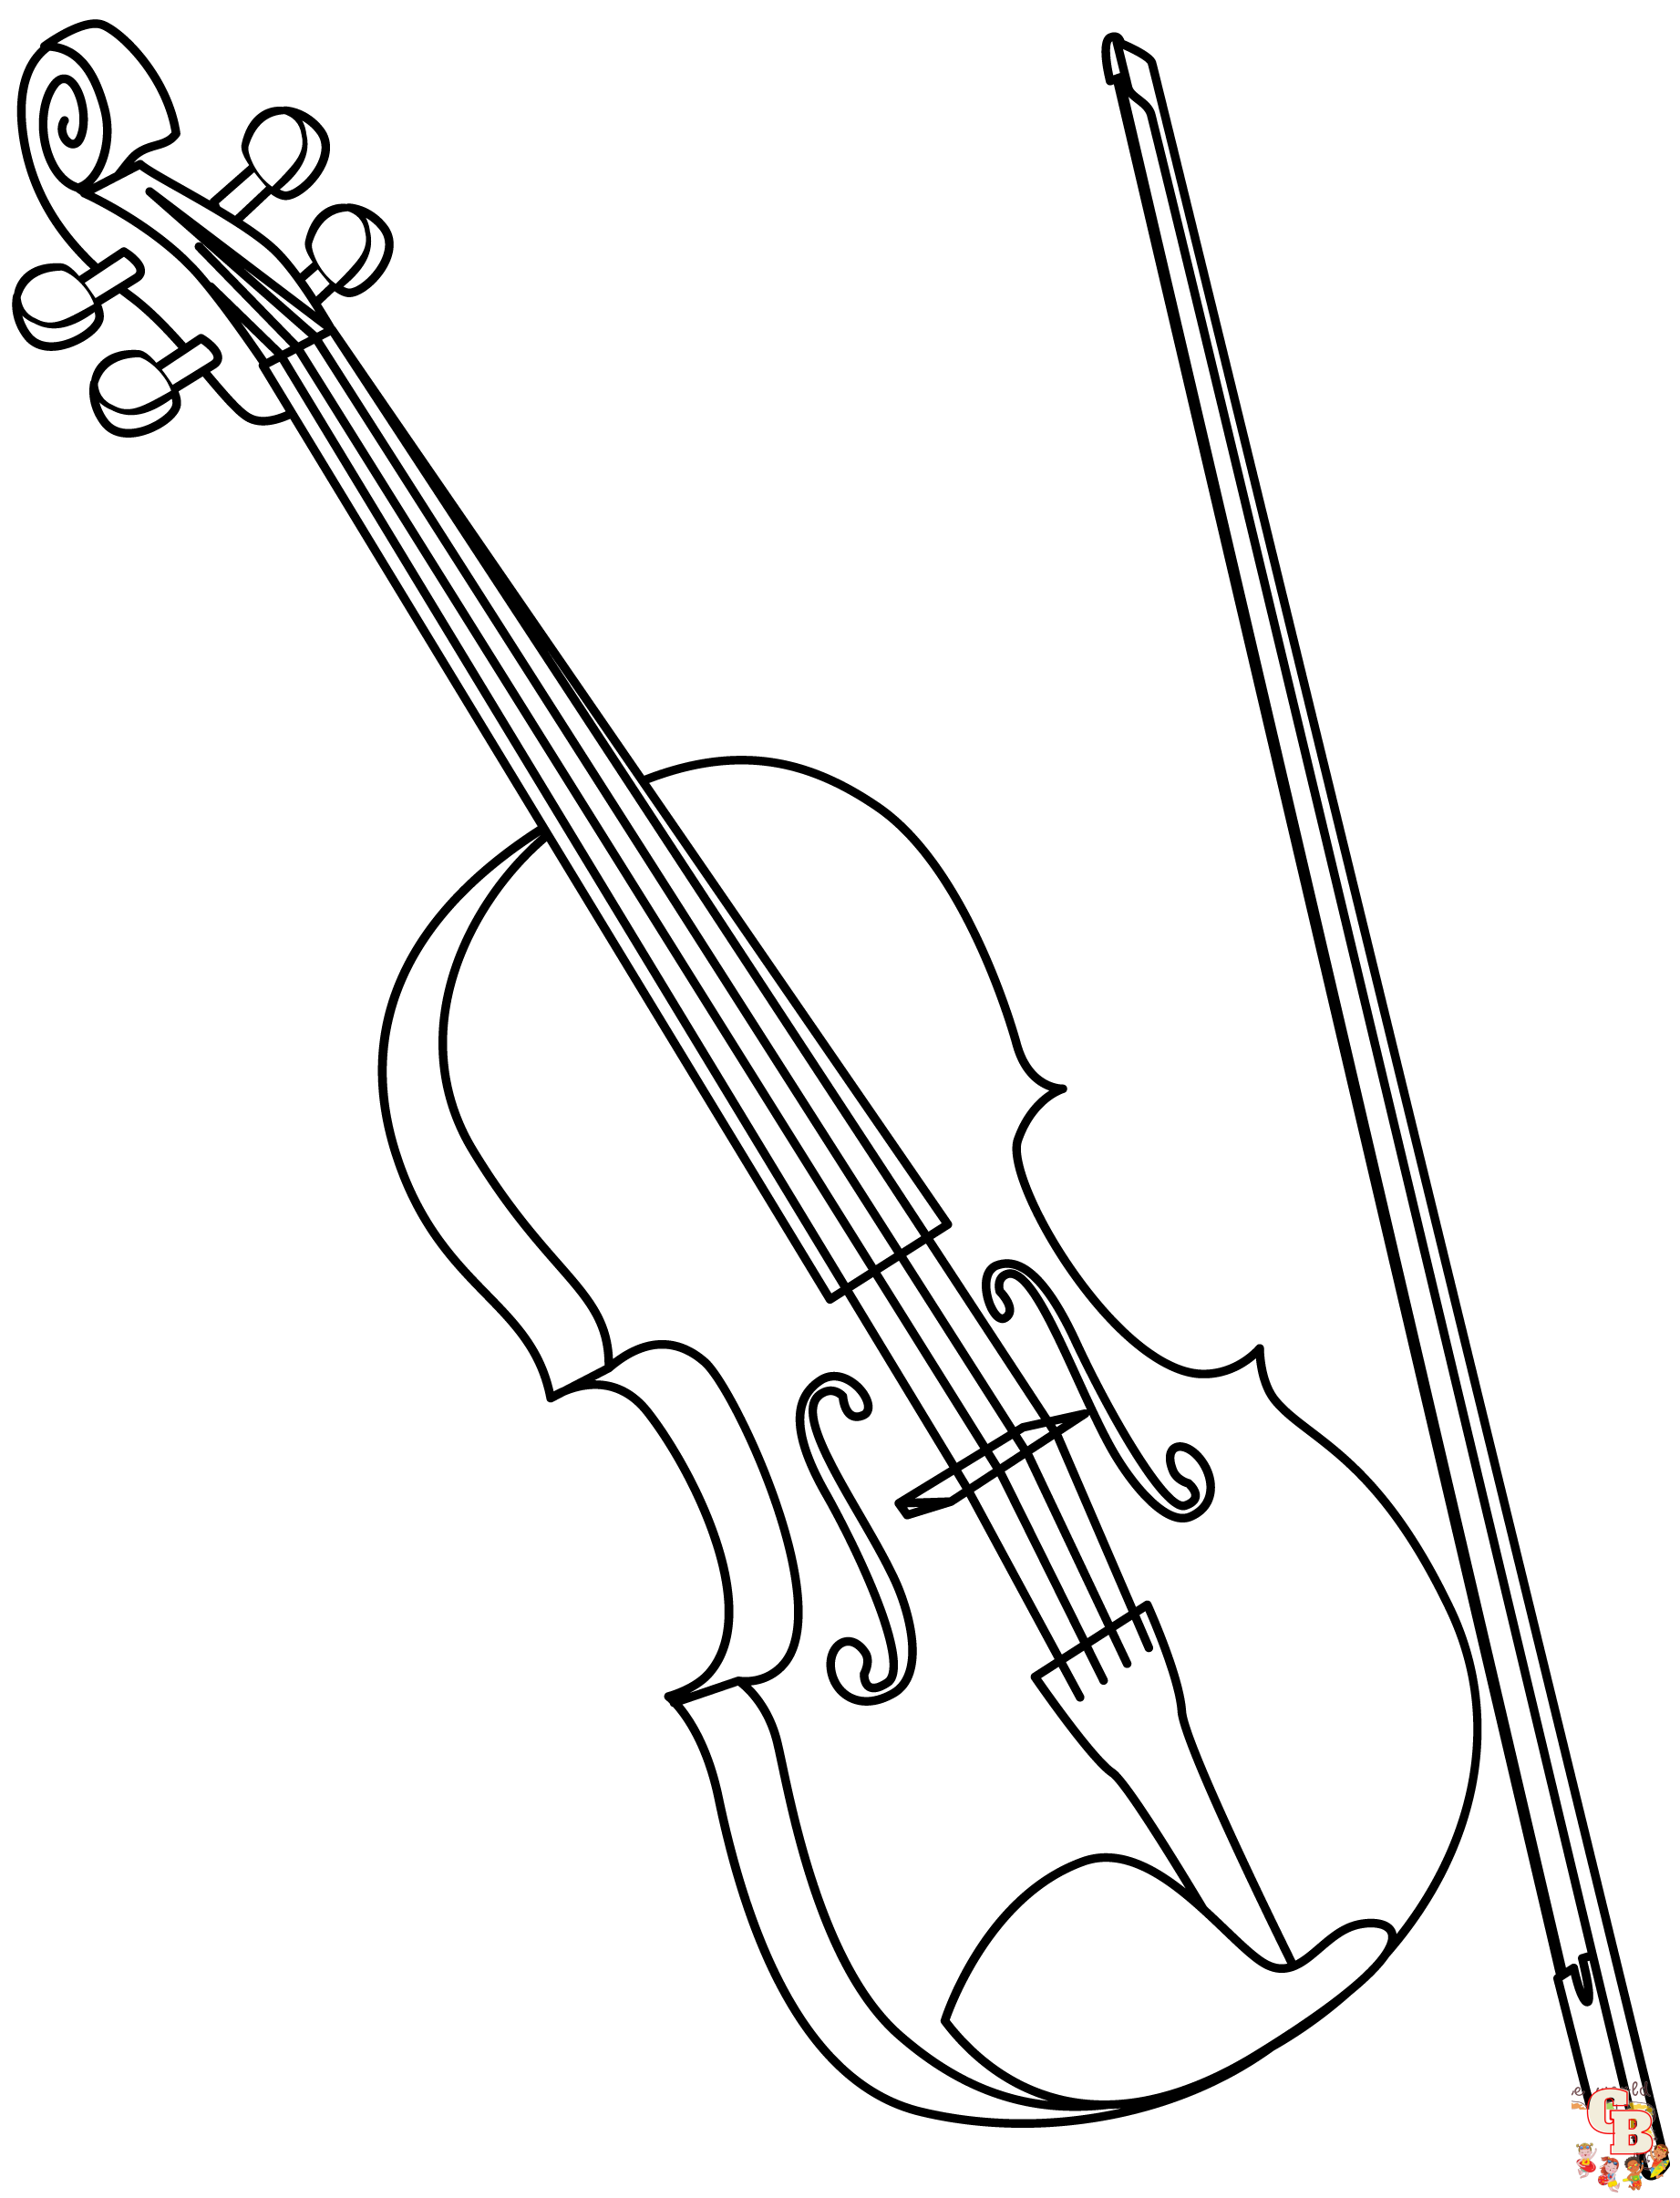 Discover the best violin coloring pages for kids